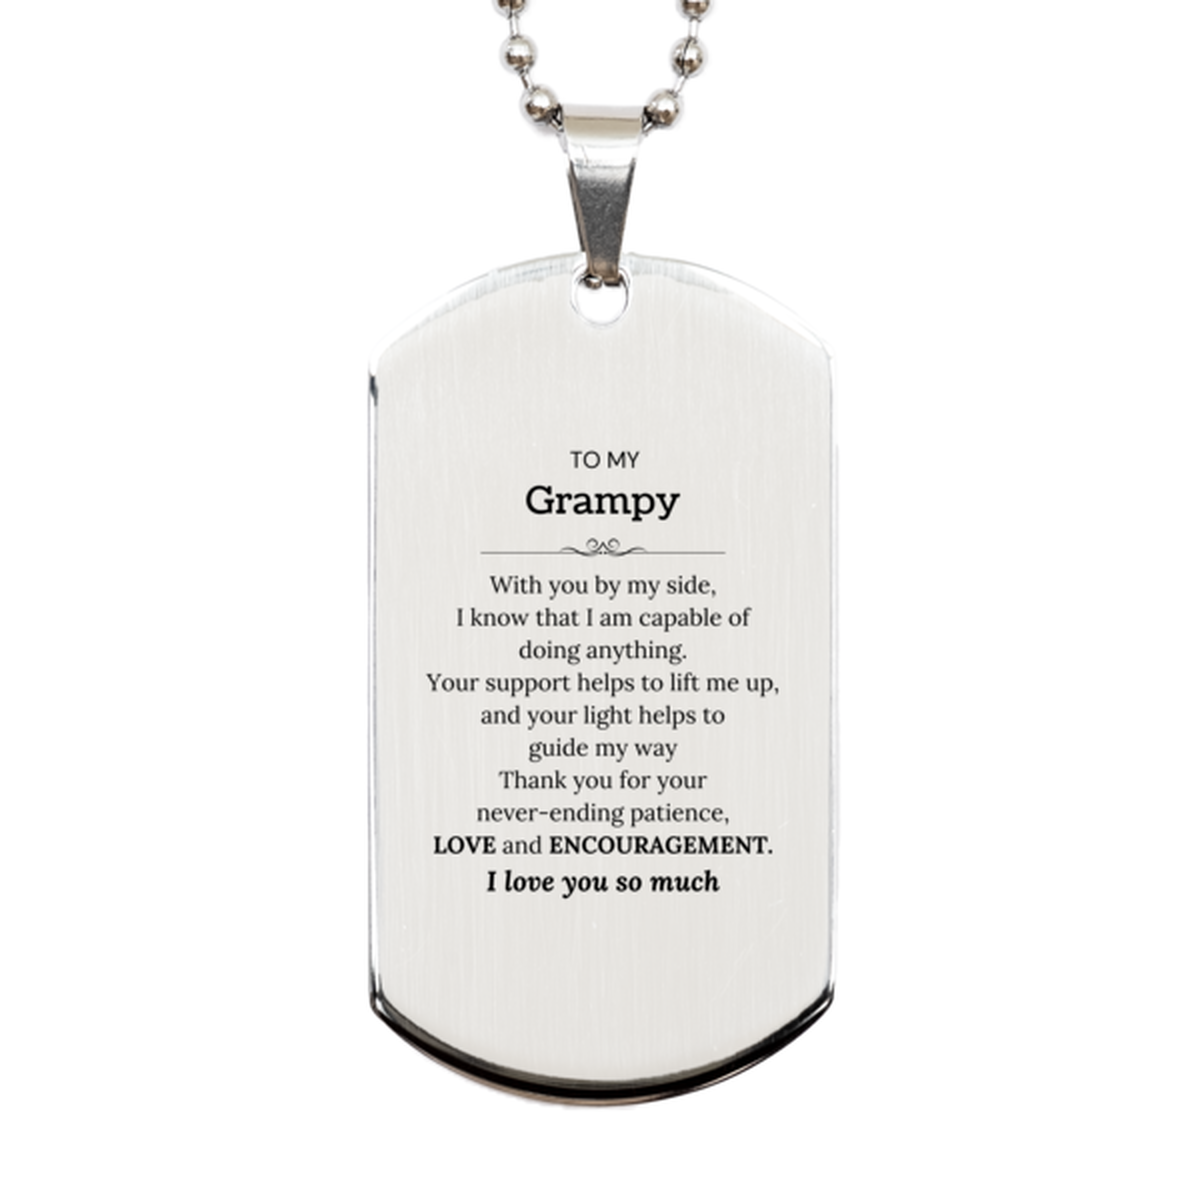 Appreciation Grampy Silver Dog Tag Gifts, To My Grampy Birthday Christmas Wedding Keepsake Gifts for Grampy With you by my side, I know that I am capable of doing anything. I love you so much